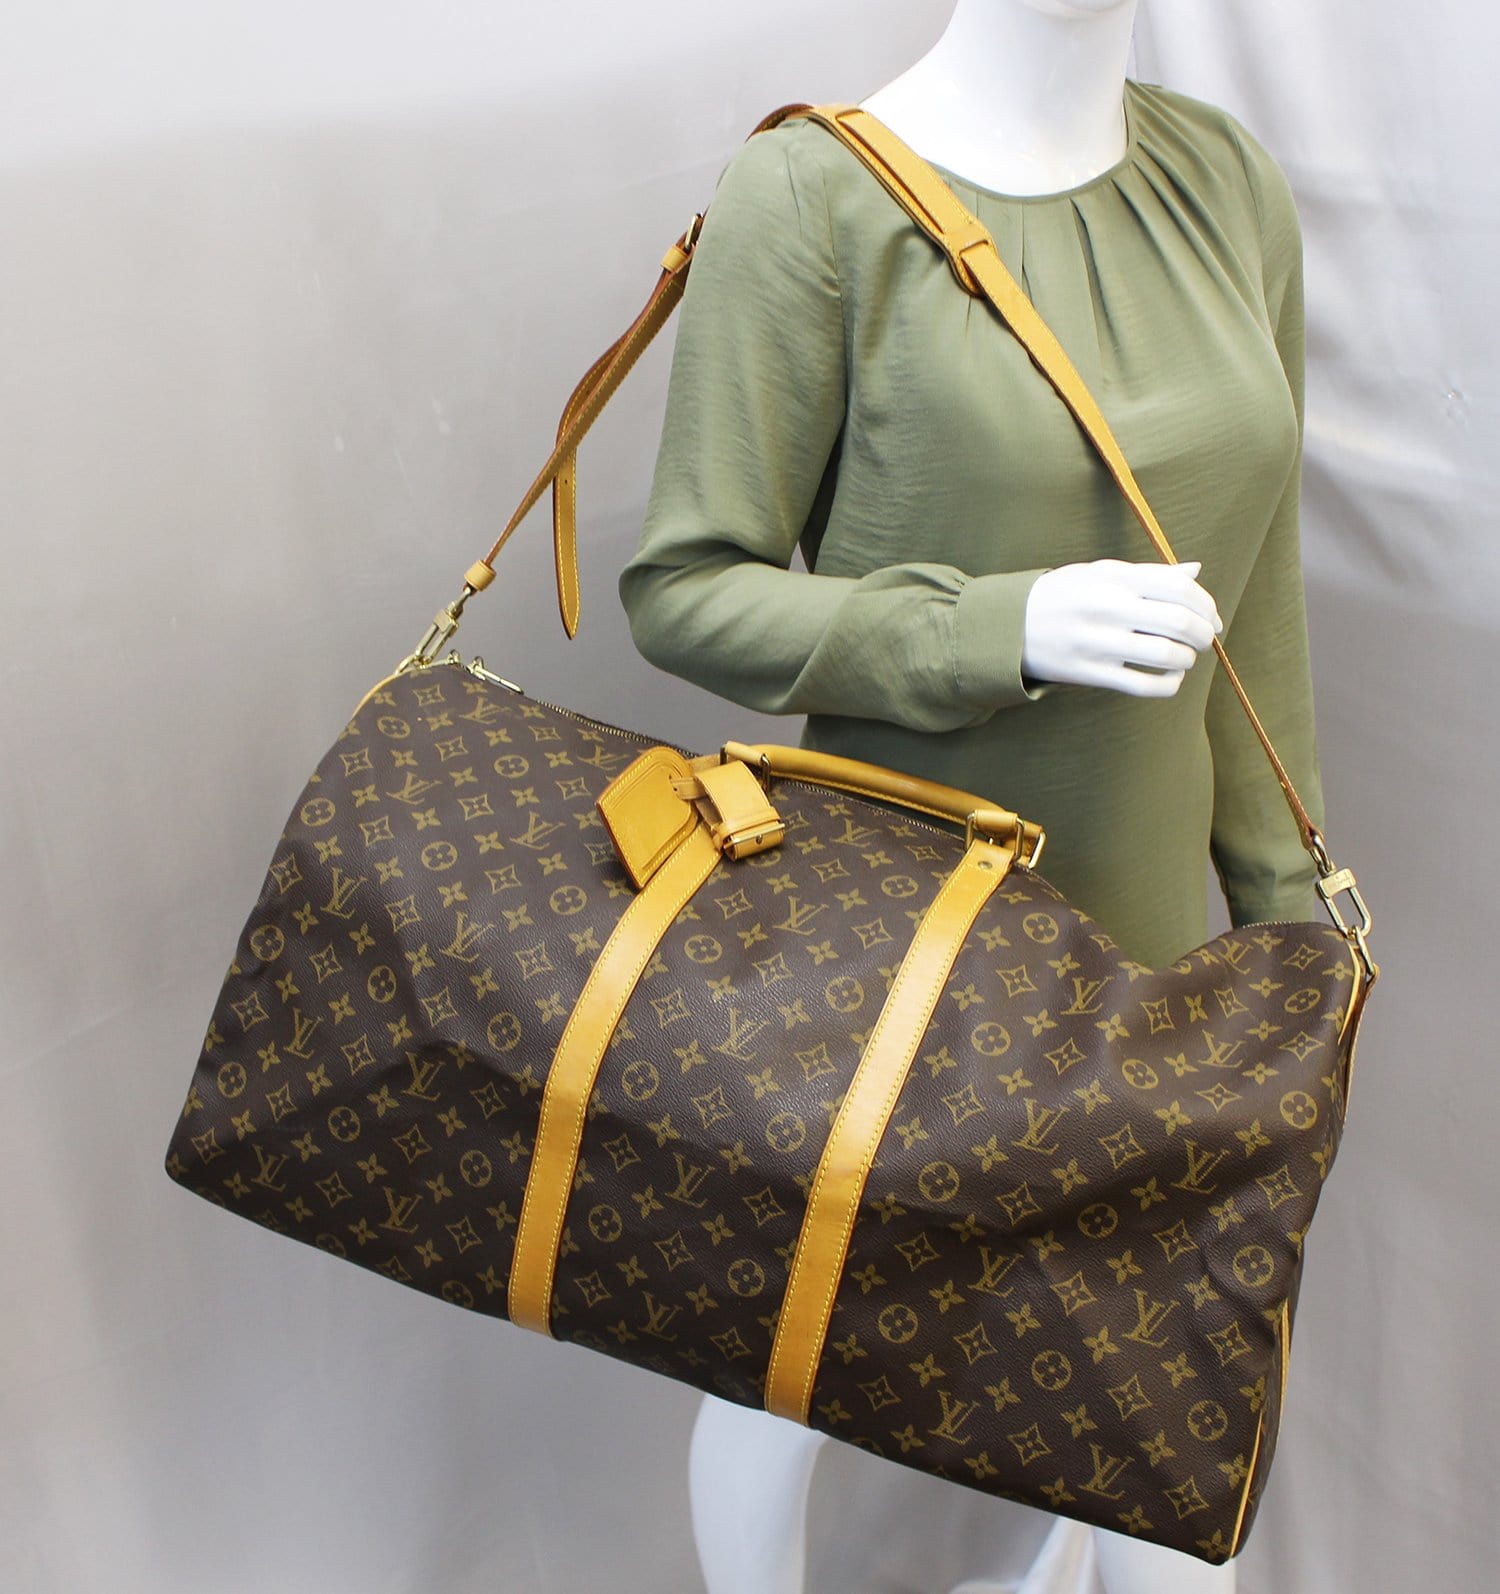 Pre-Owned Louis Vuitton Keepall Bandouliere Mon ogram 60 